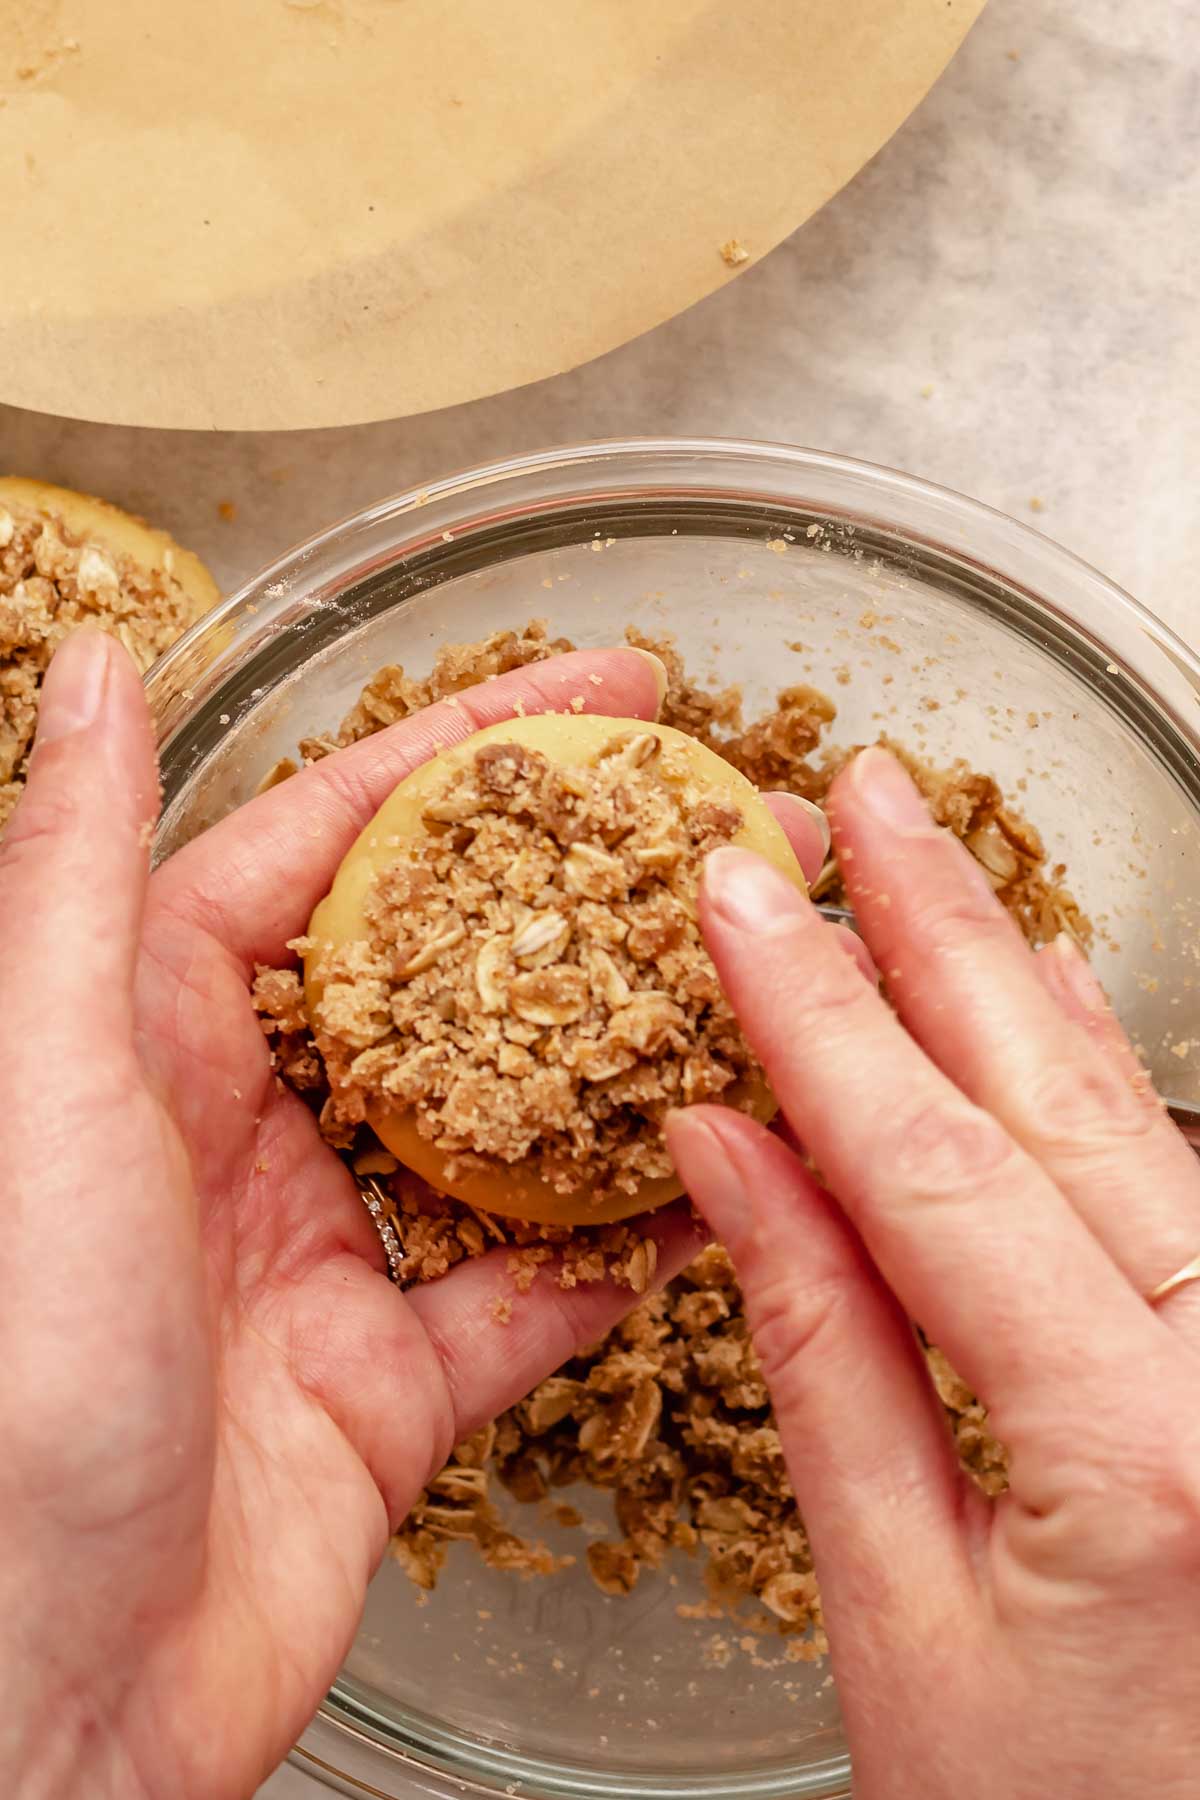 Hands push crumb topping onto the top of the cookie.